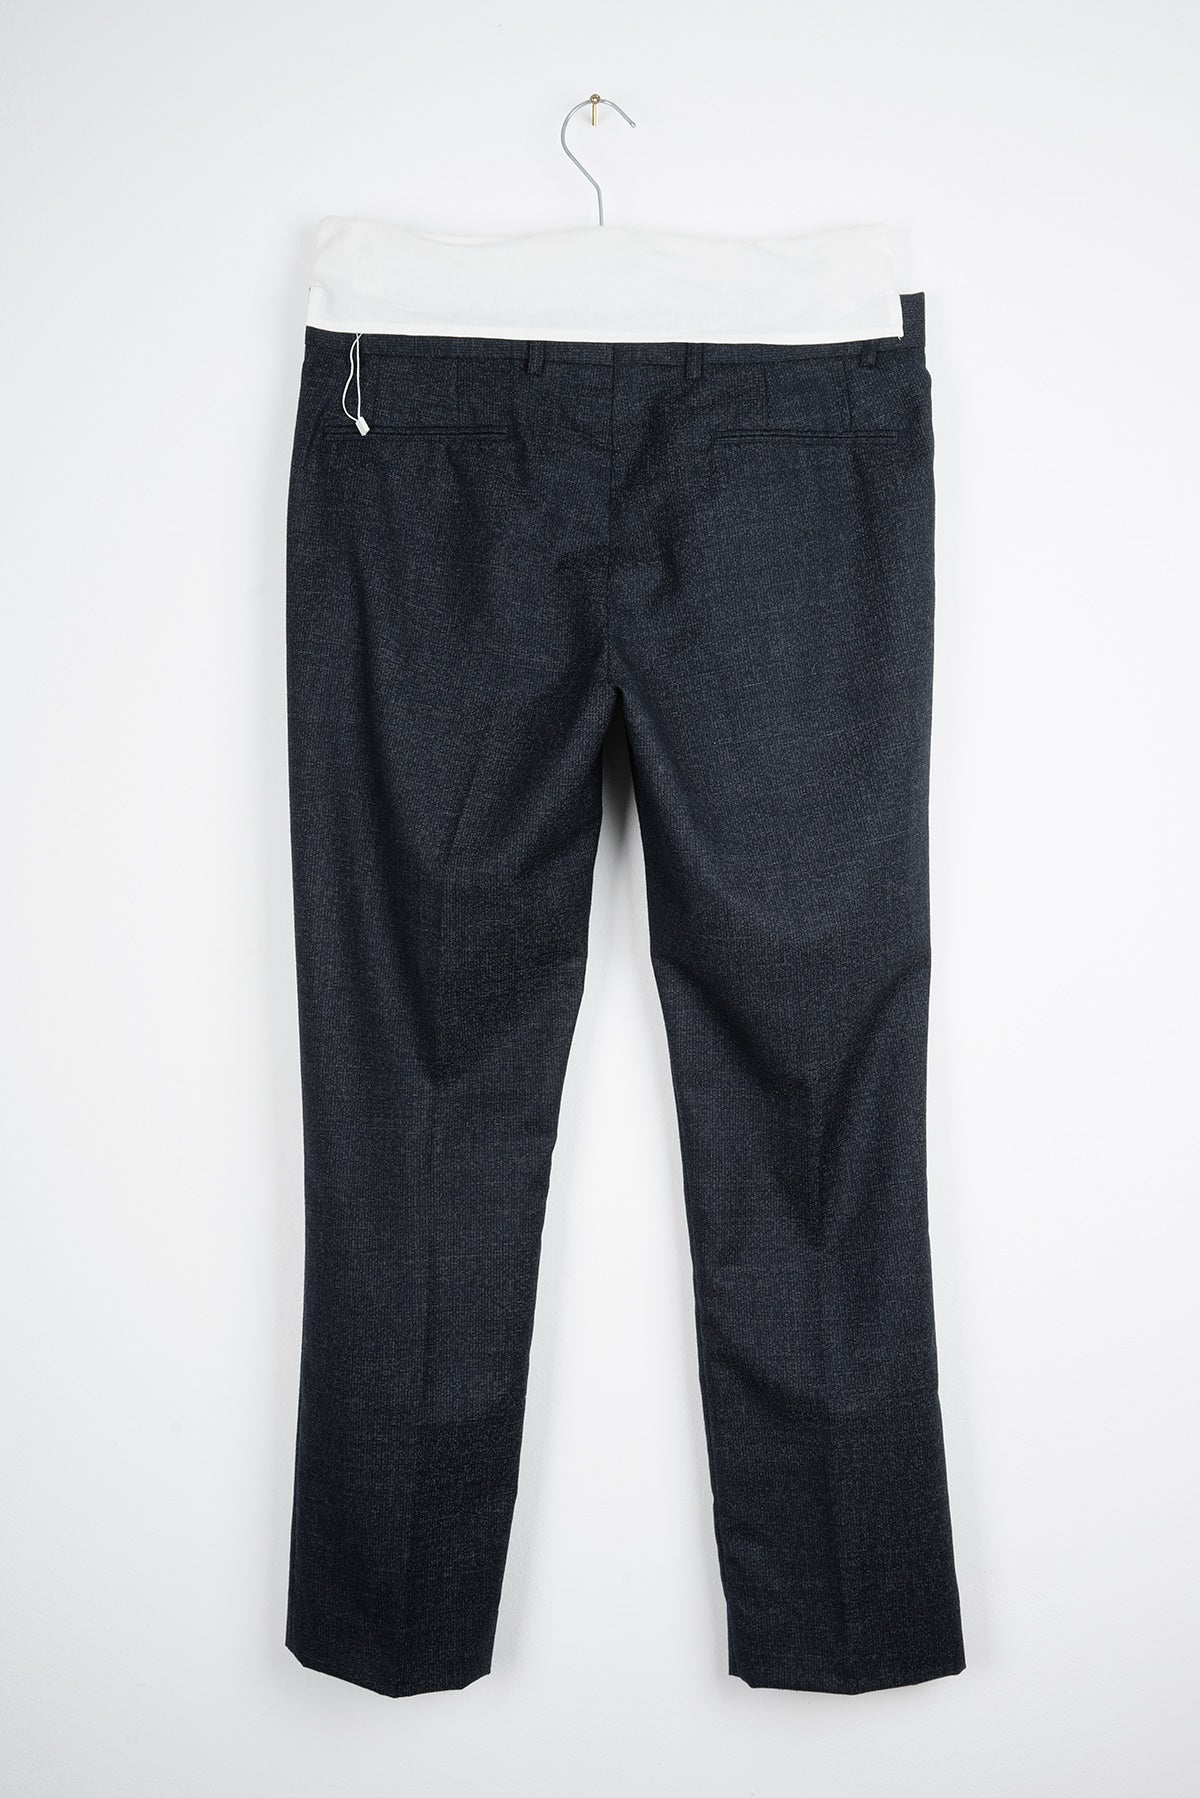 2009 A/W PLEATED TROUSERS WITH COIN POCKET